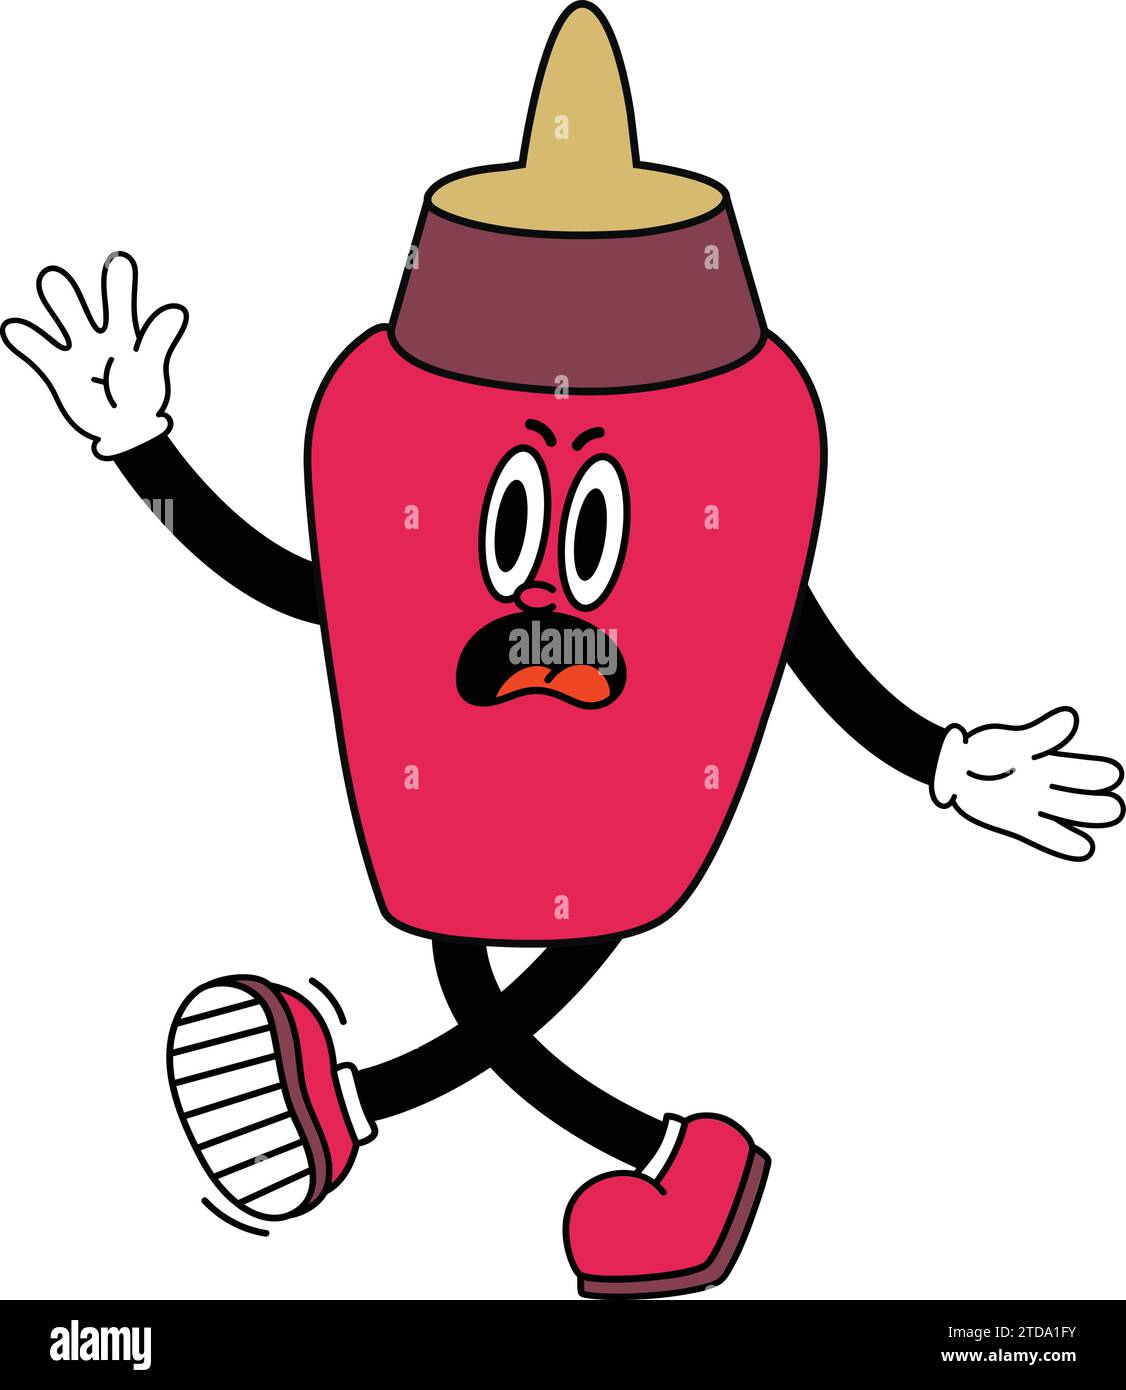 Cartoon character Chili sauce bottle cartoon character.Sauce bottle cartoon character with sneaky face Vector.spice, meal, tasty, symbol, graphic. Stock Vector